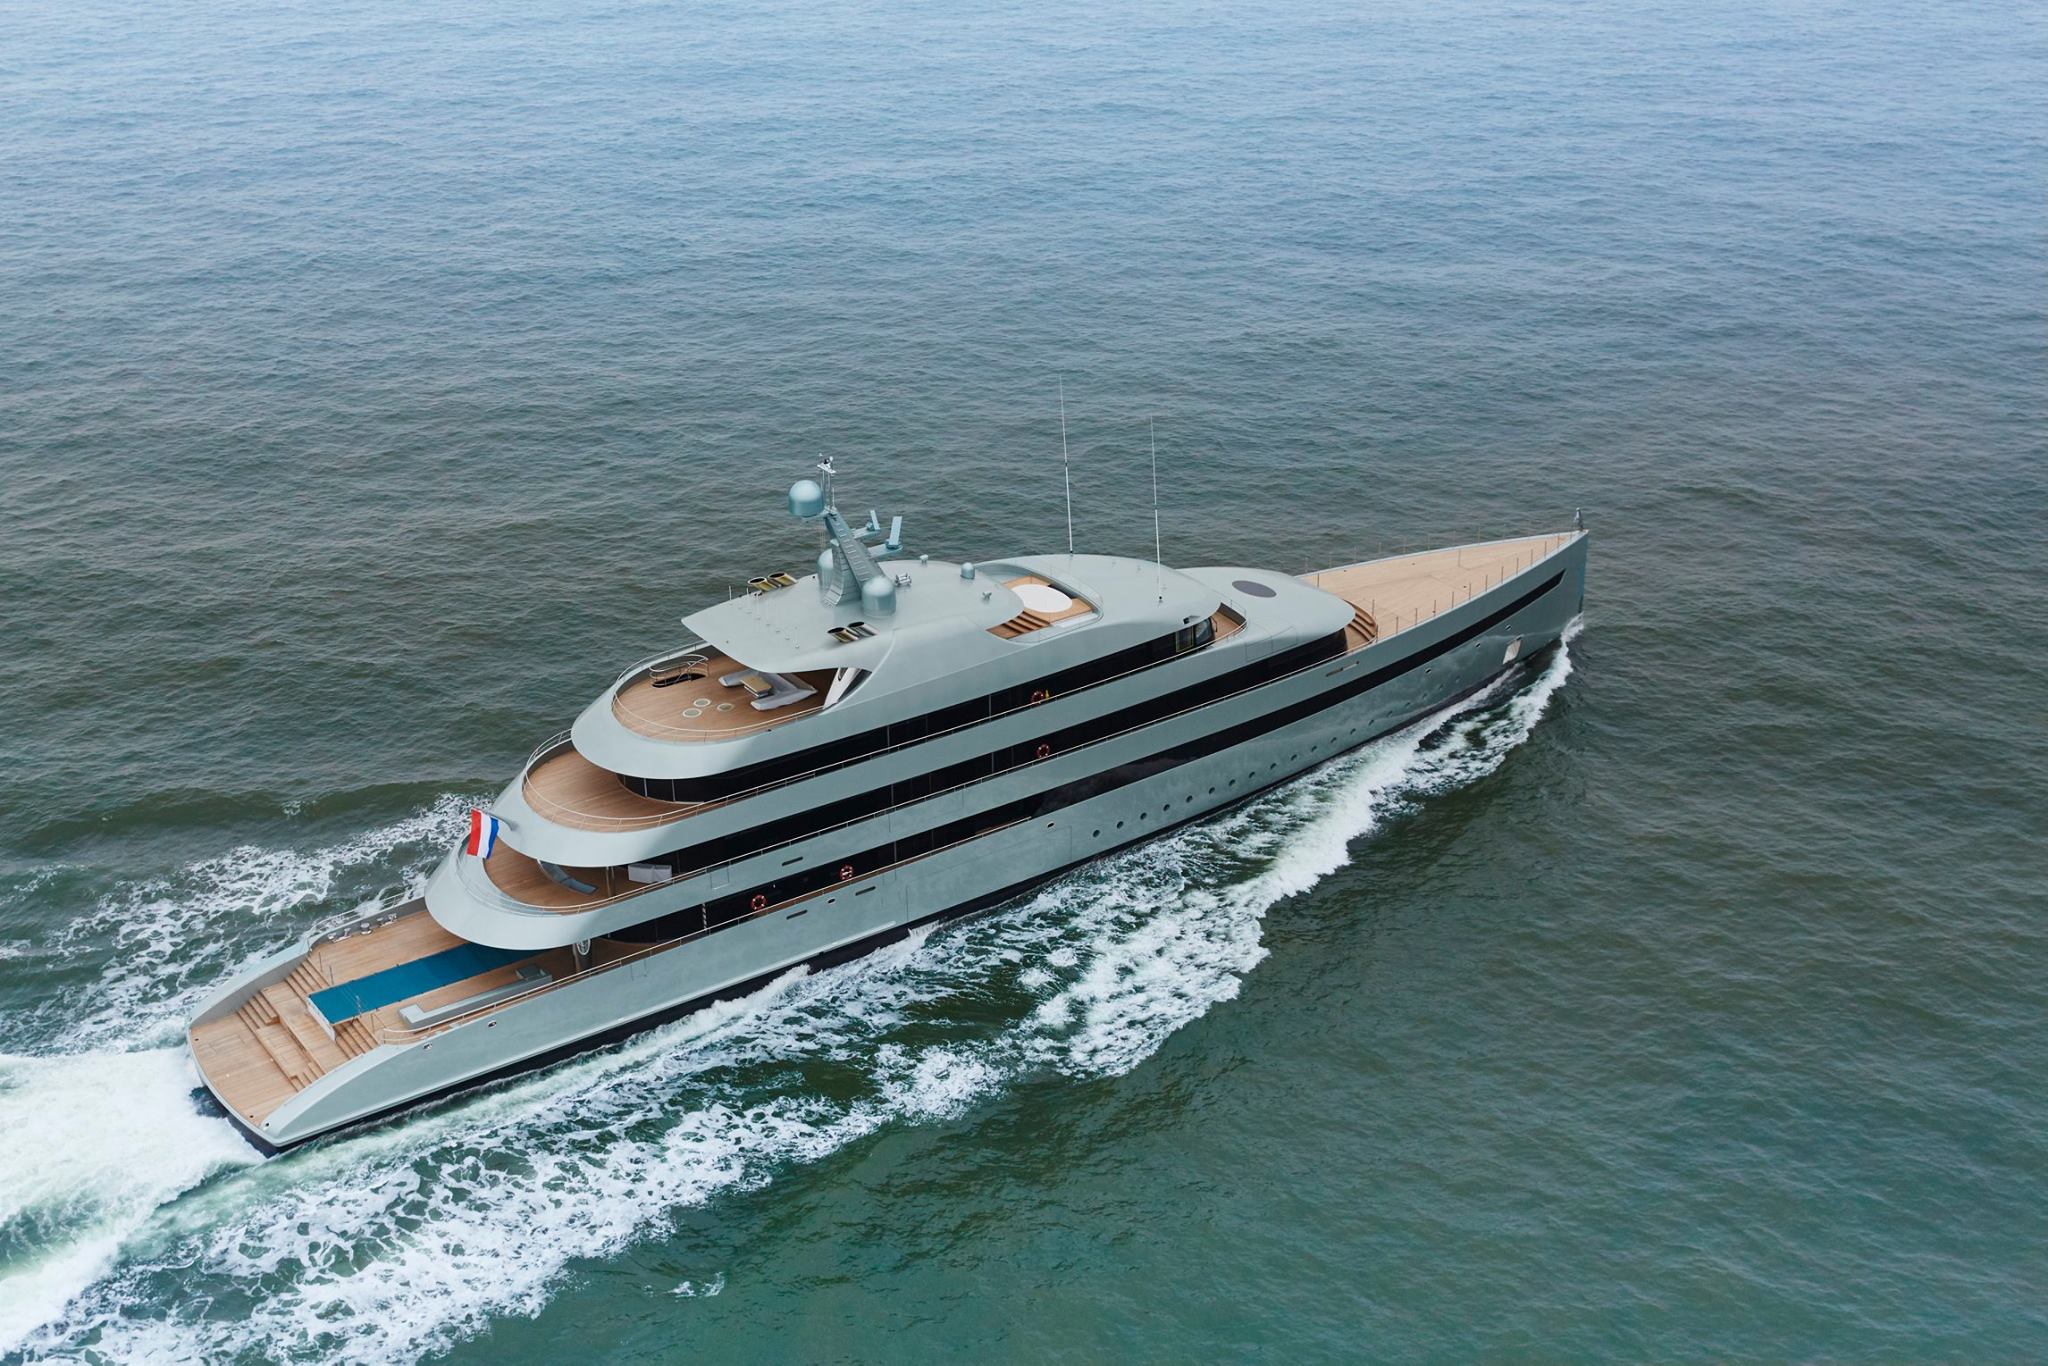 all feadship yachts